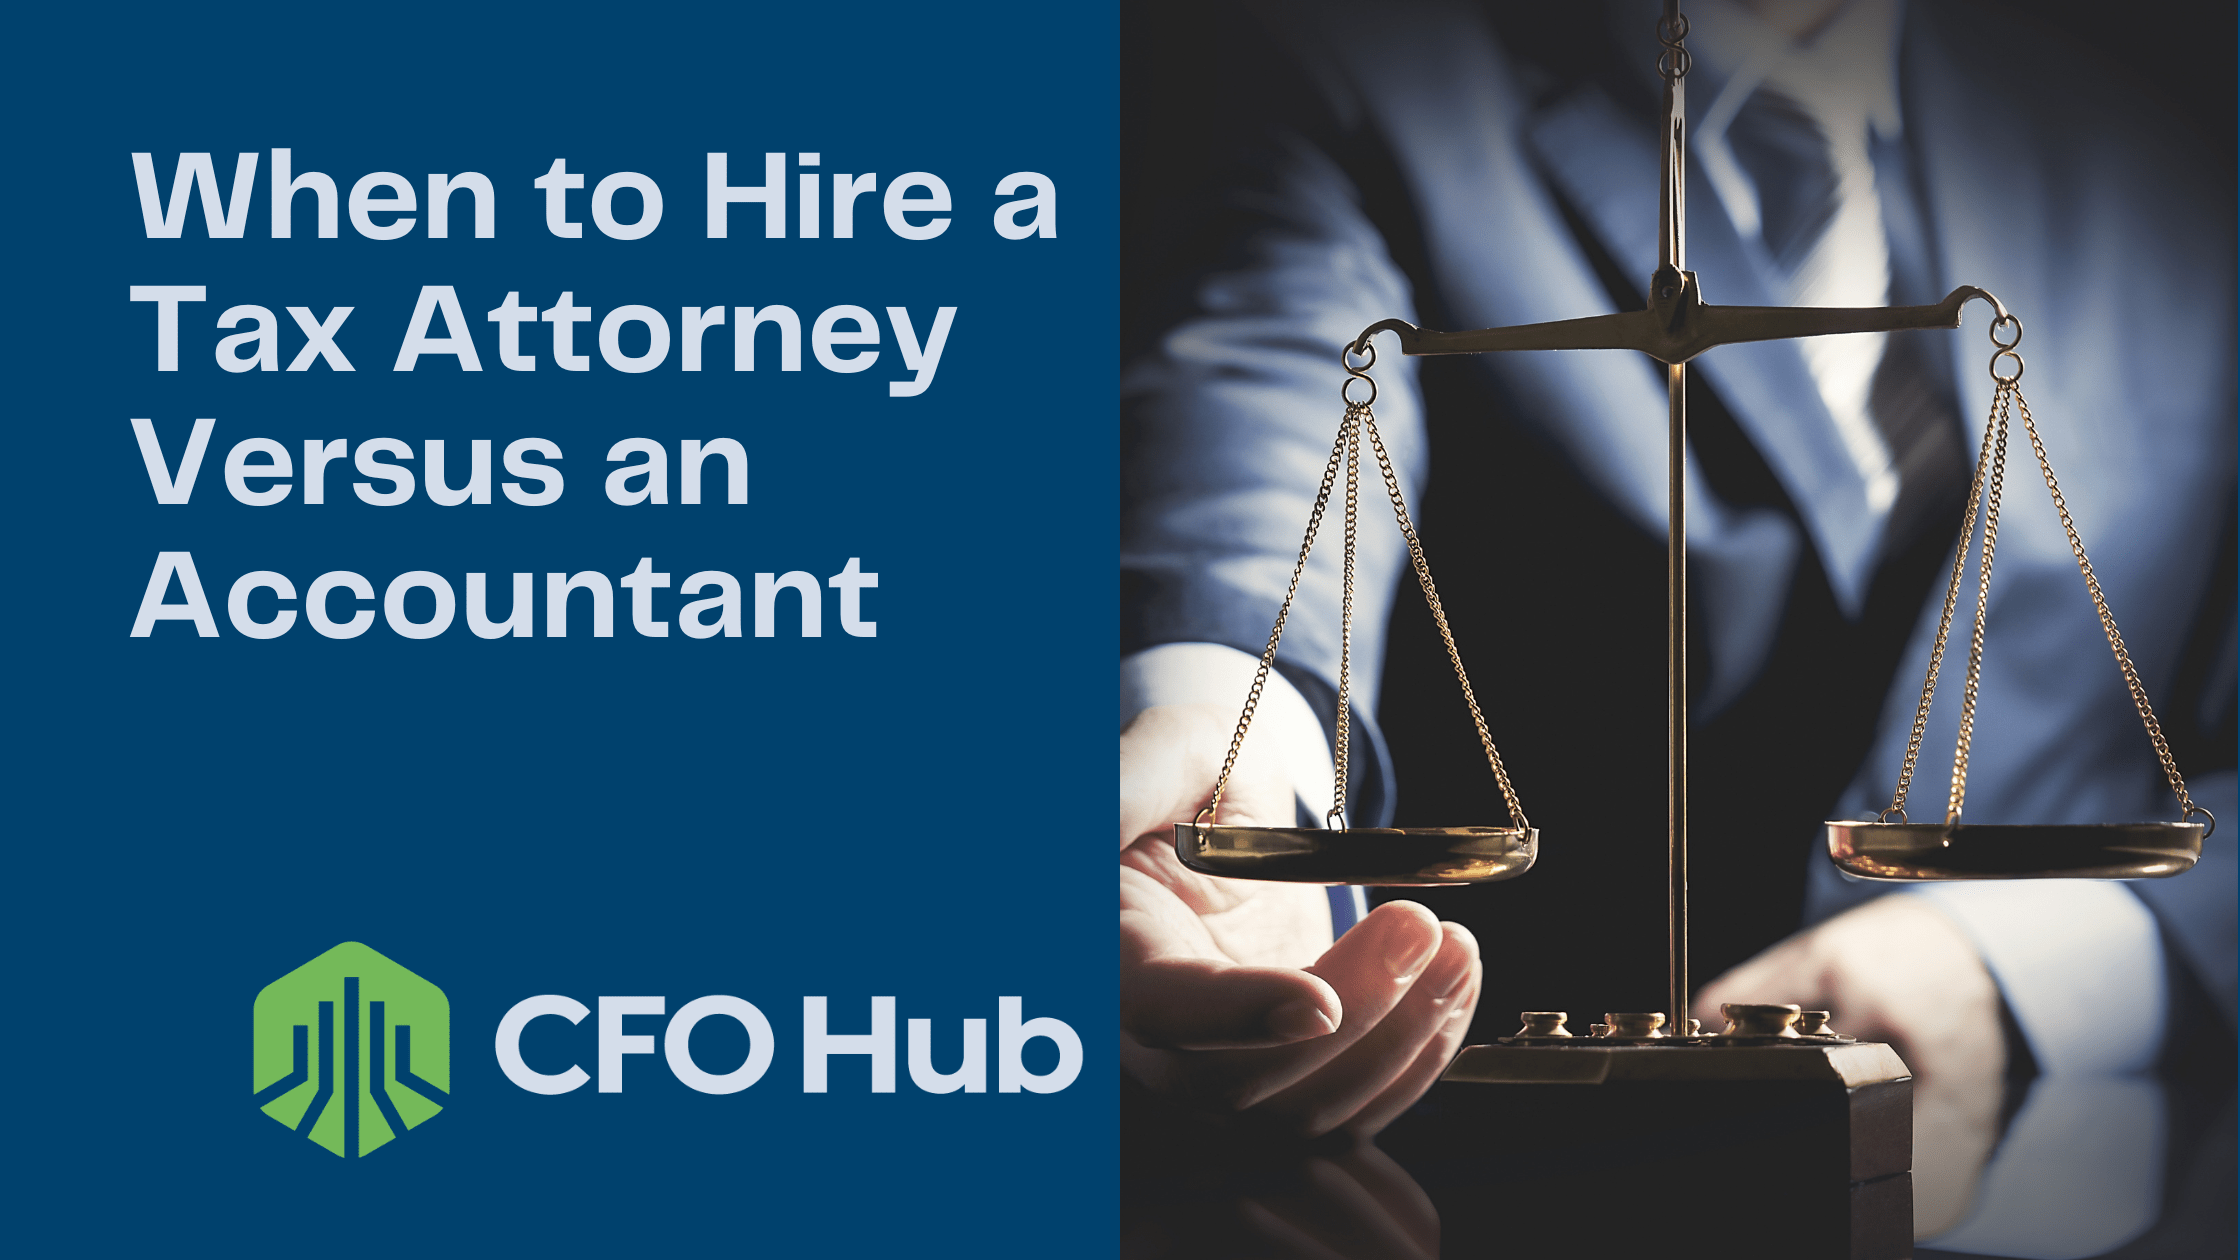 The image features a person holding a balance scale in one hand with a text overlay that reads, "When to Hire a Tax Attorney Versus an Accountant." The lower left corner displays the "CFO Hub" logo along with a graphic element. The background is darkened for emphasis.